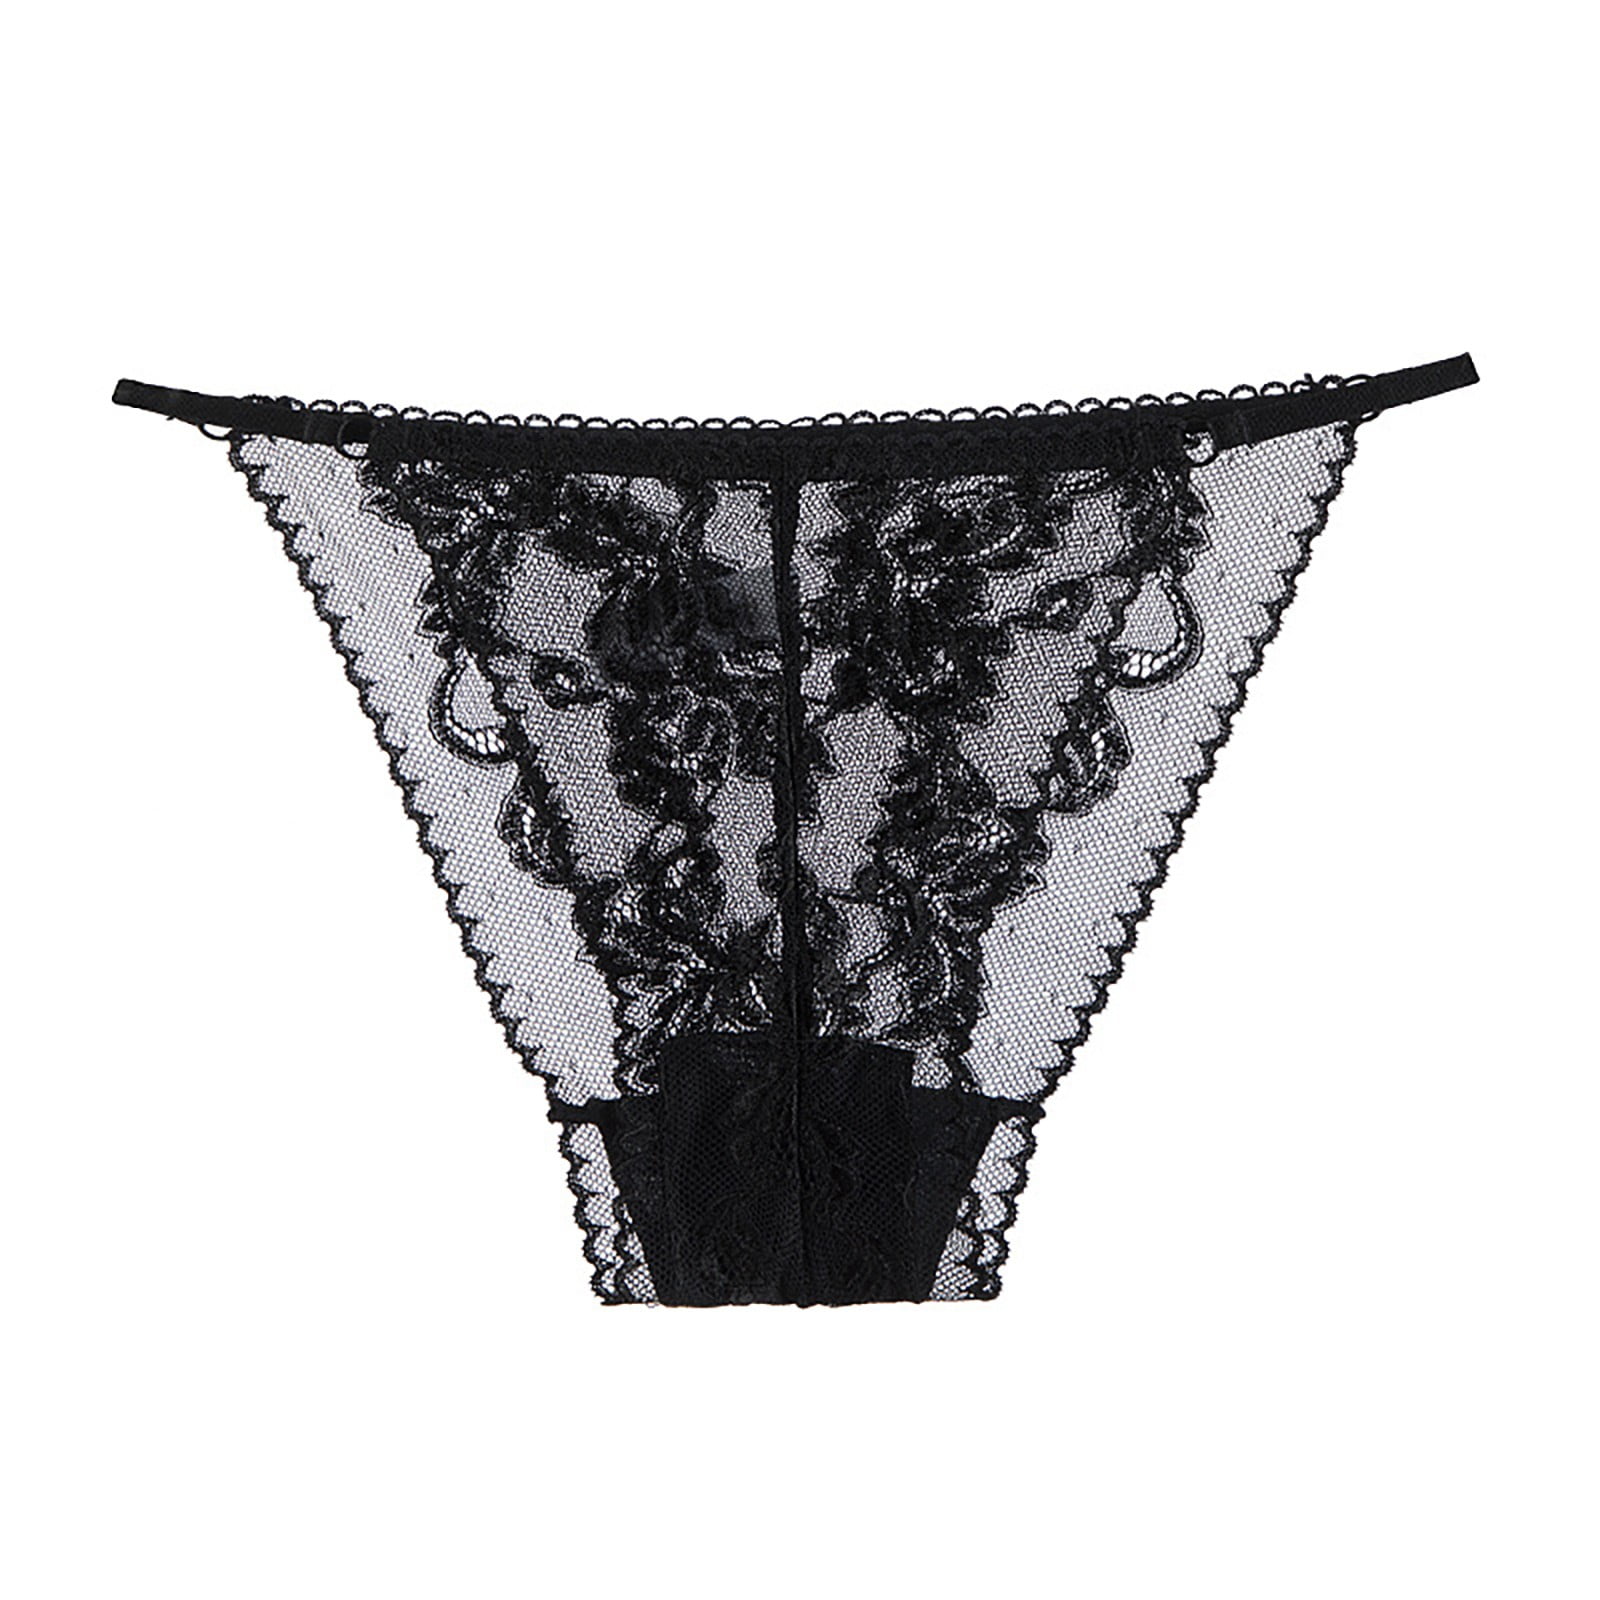 Outfmvch lingerie for women Women Lace Panties Underwear With Cute